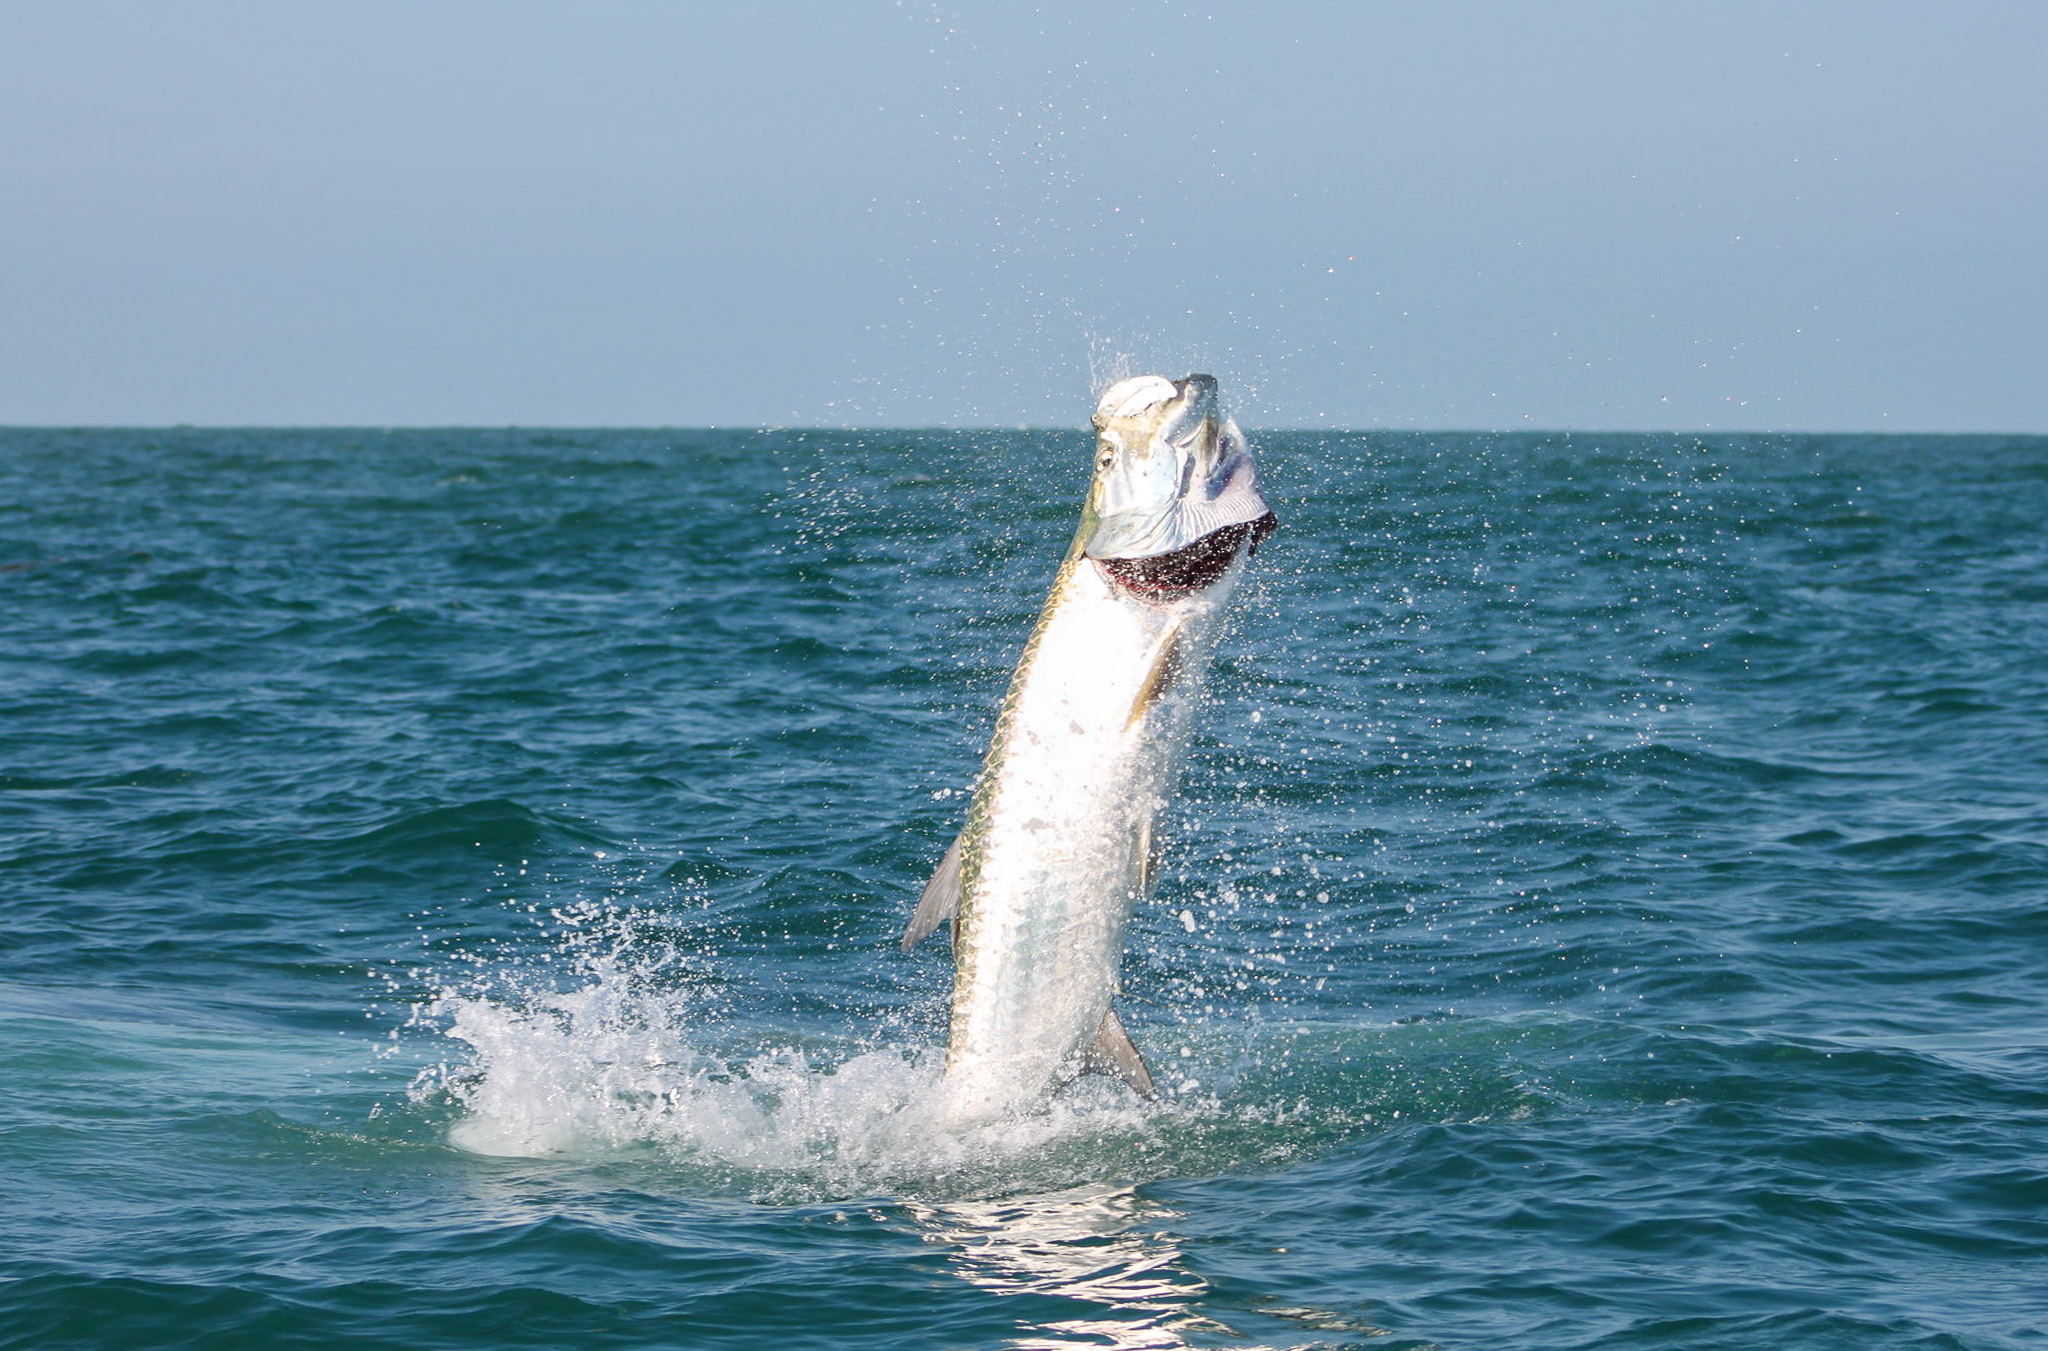 A tarpon hooked by an angler jumps out of the water.